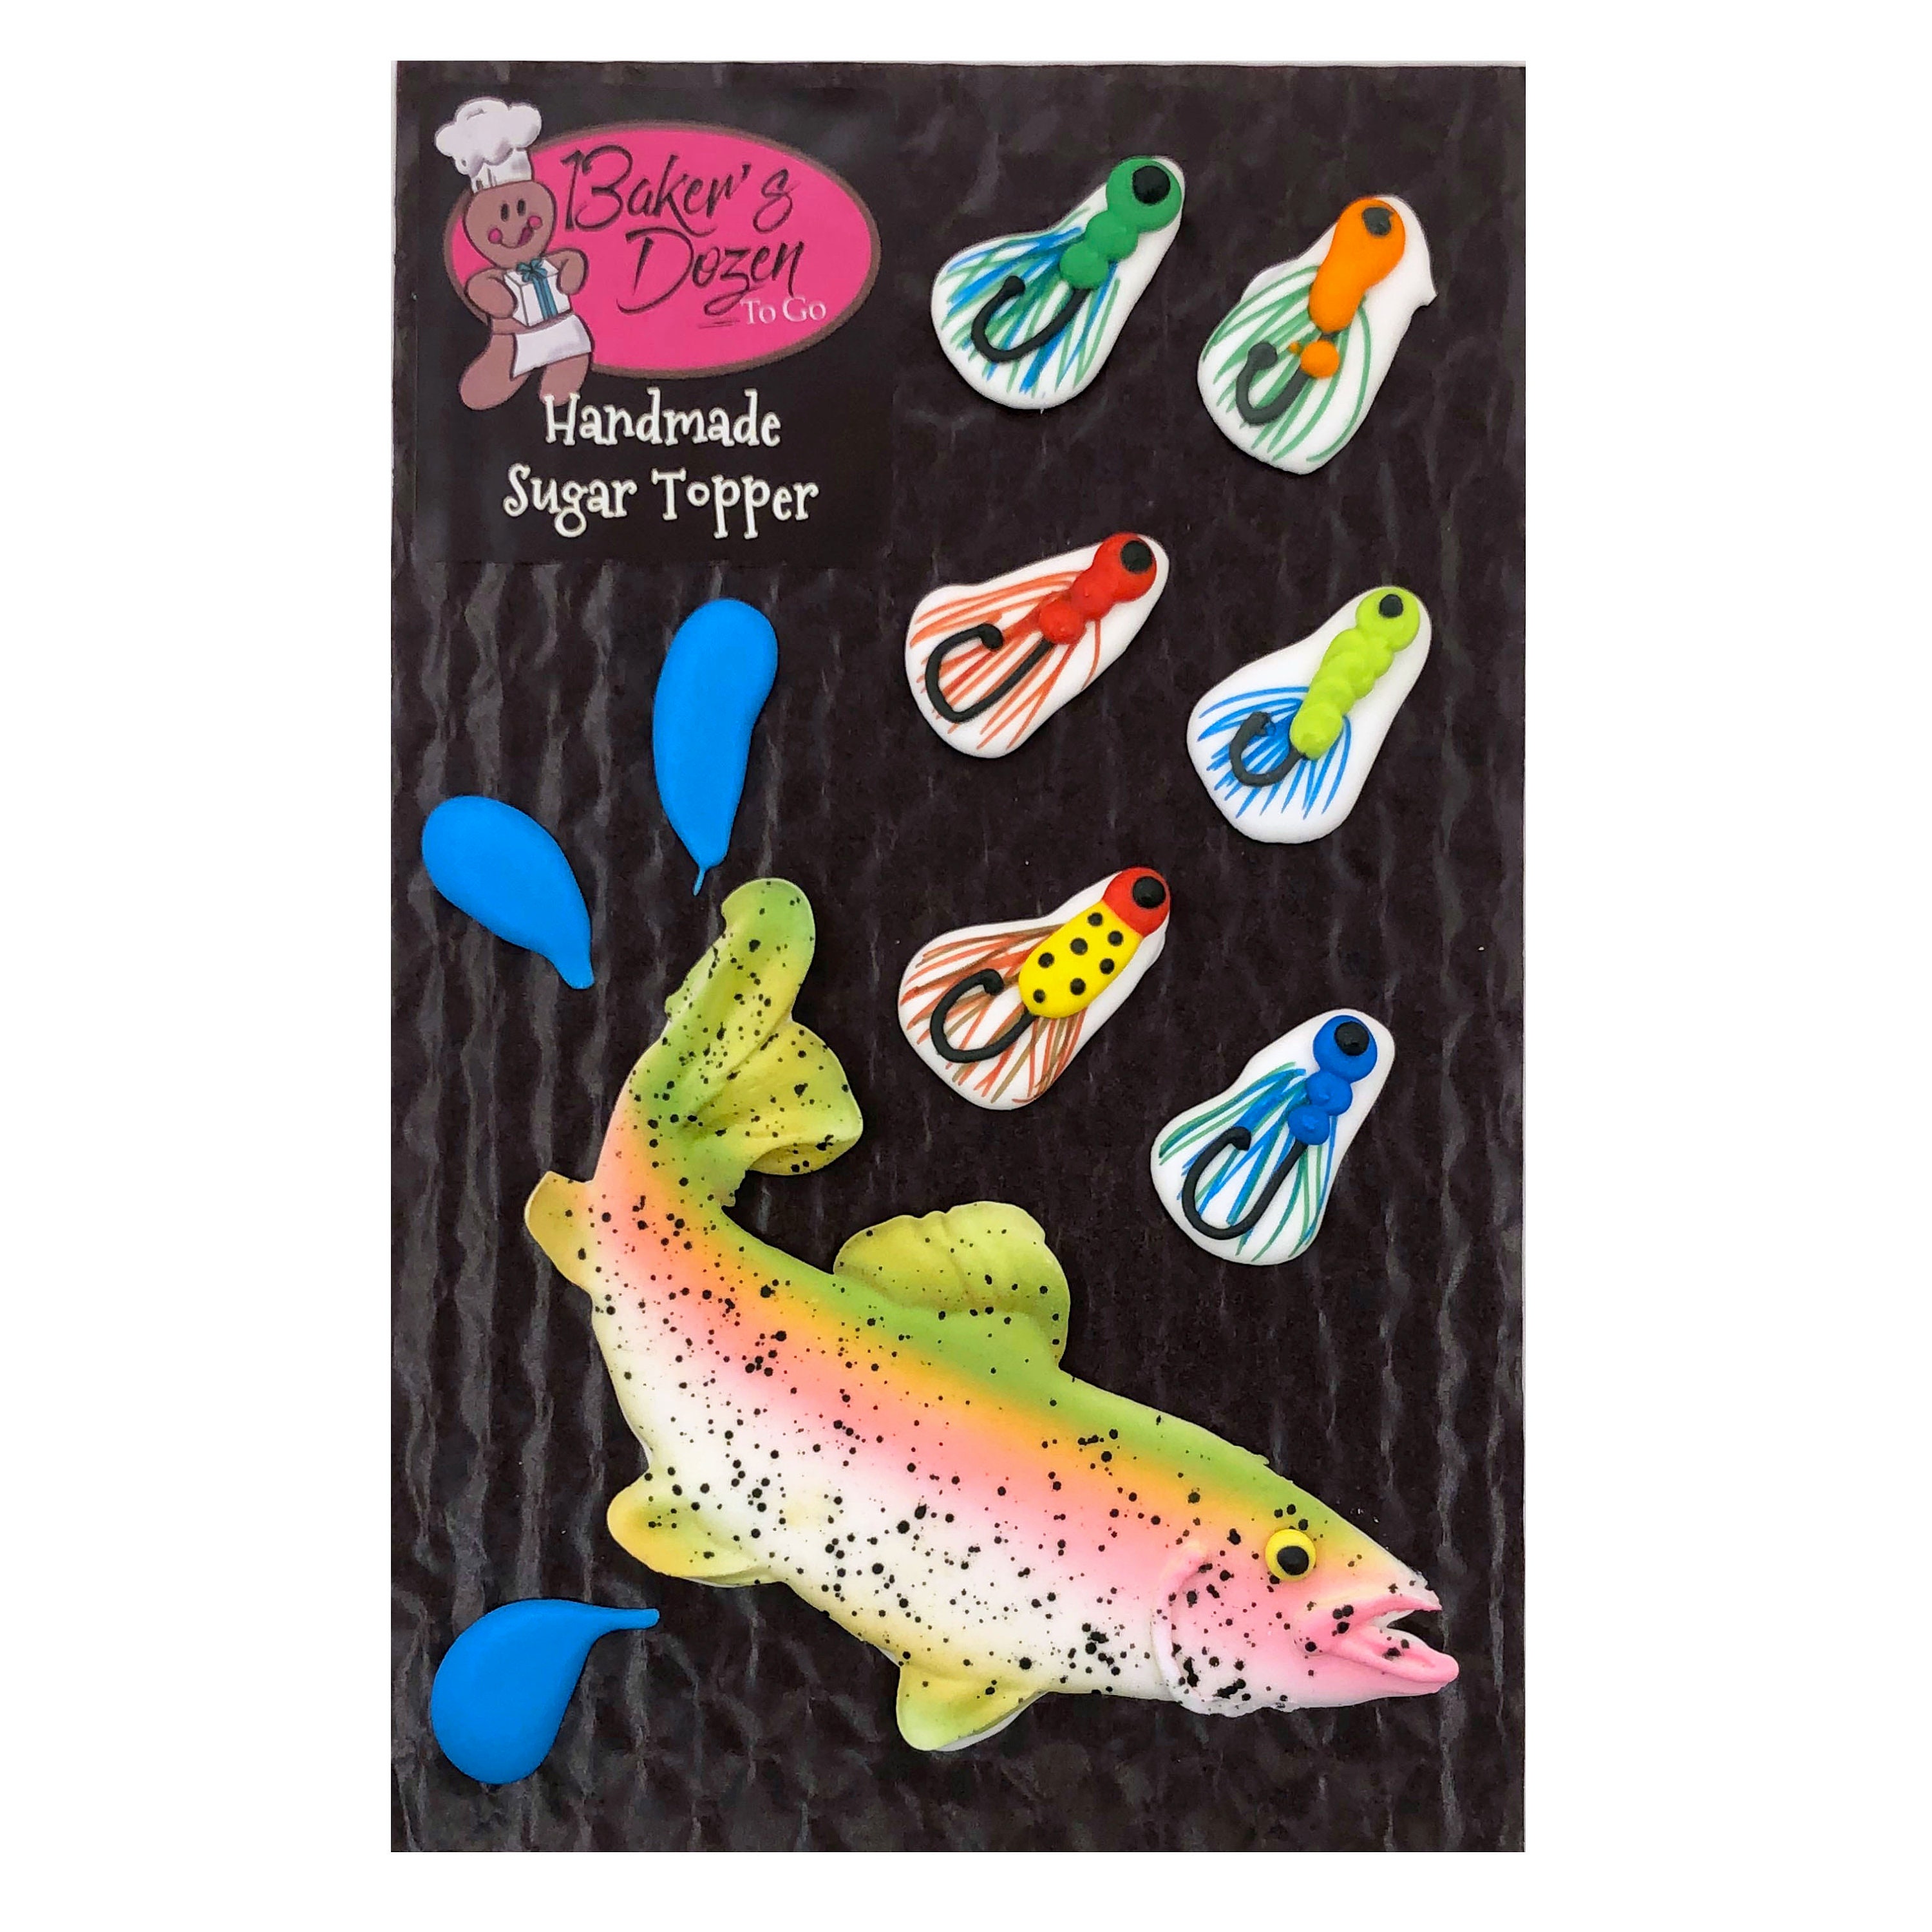 Jumping Rainbow Trout- 10 pcs Fish and Fly Fishing Lures Edible Royal Icing  Cake Topper Cupcake Decoration Handmade by BakersDozenToGo